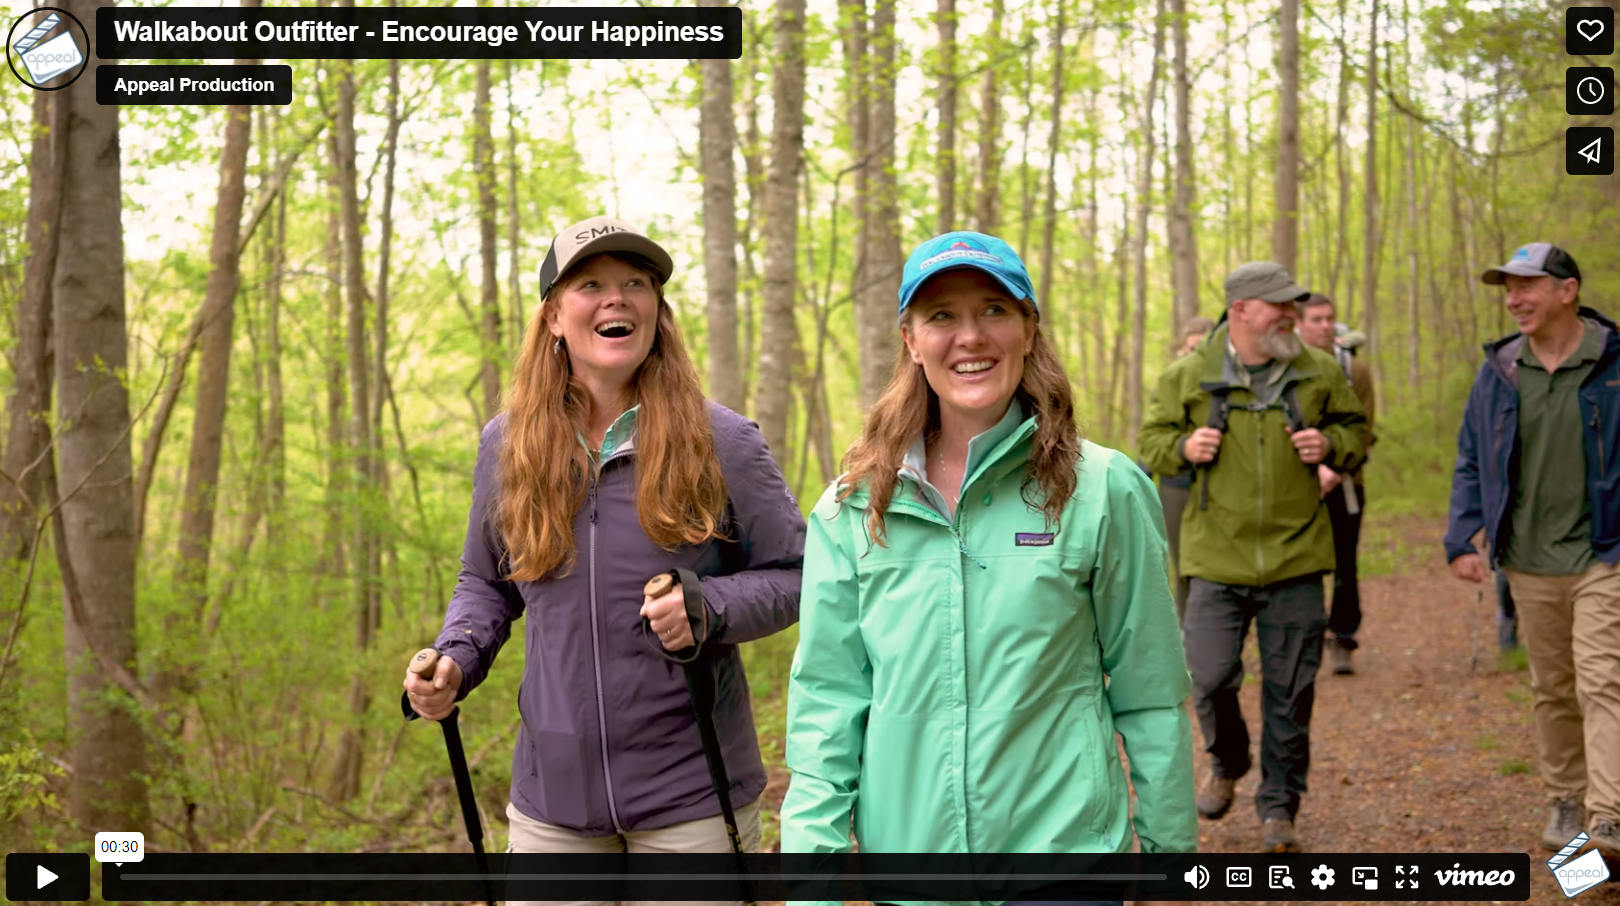 Customer Marketing: Walkabout Outfitter